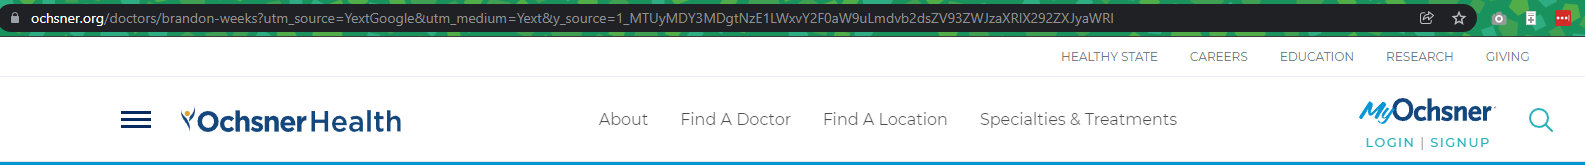 Oschner Health does the same, as indicated by the "locked" padlock in the address bar.